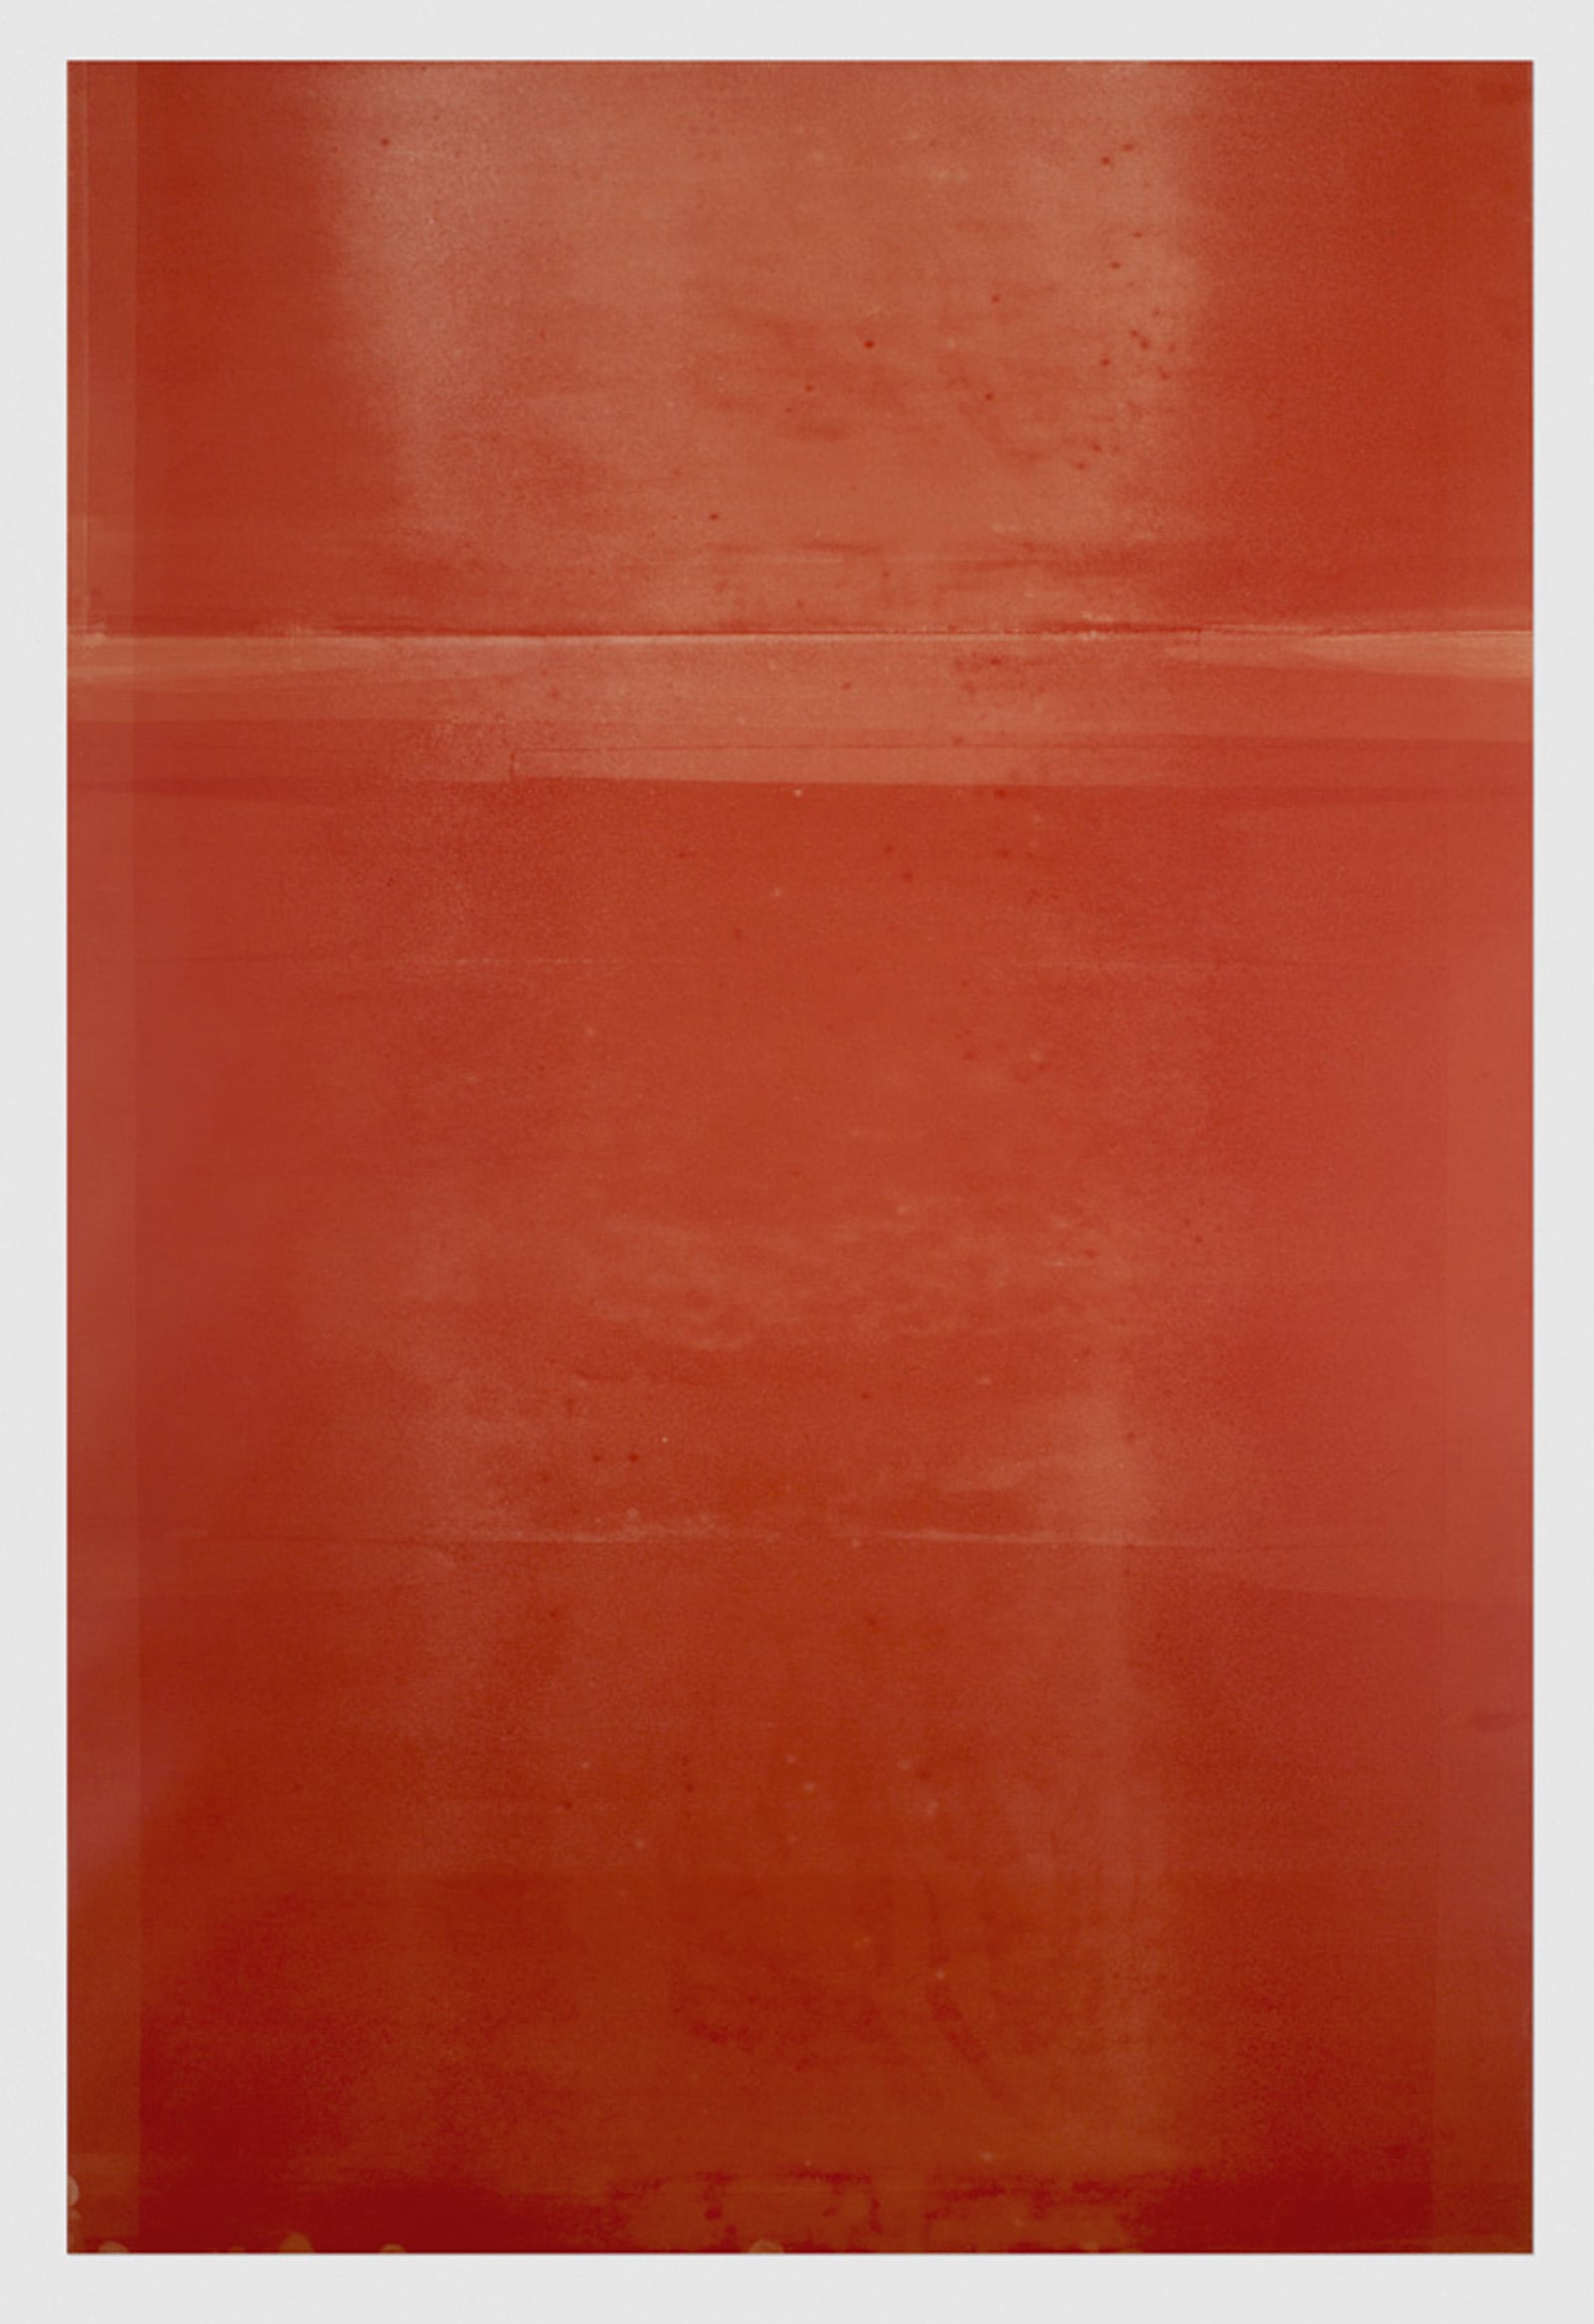   Untitled (red #2 from the ongoing series reflected/repeated)  2014, oil based ink painted onto mylar 24 x 36 inches 